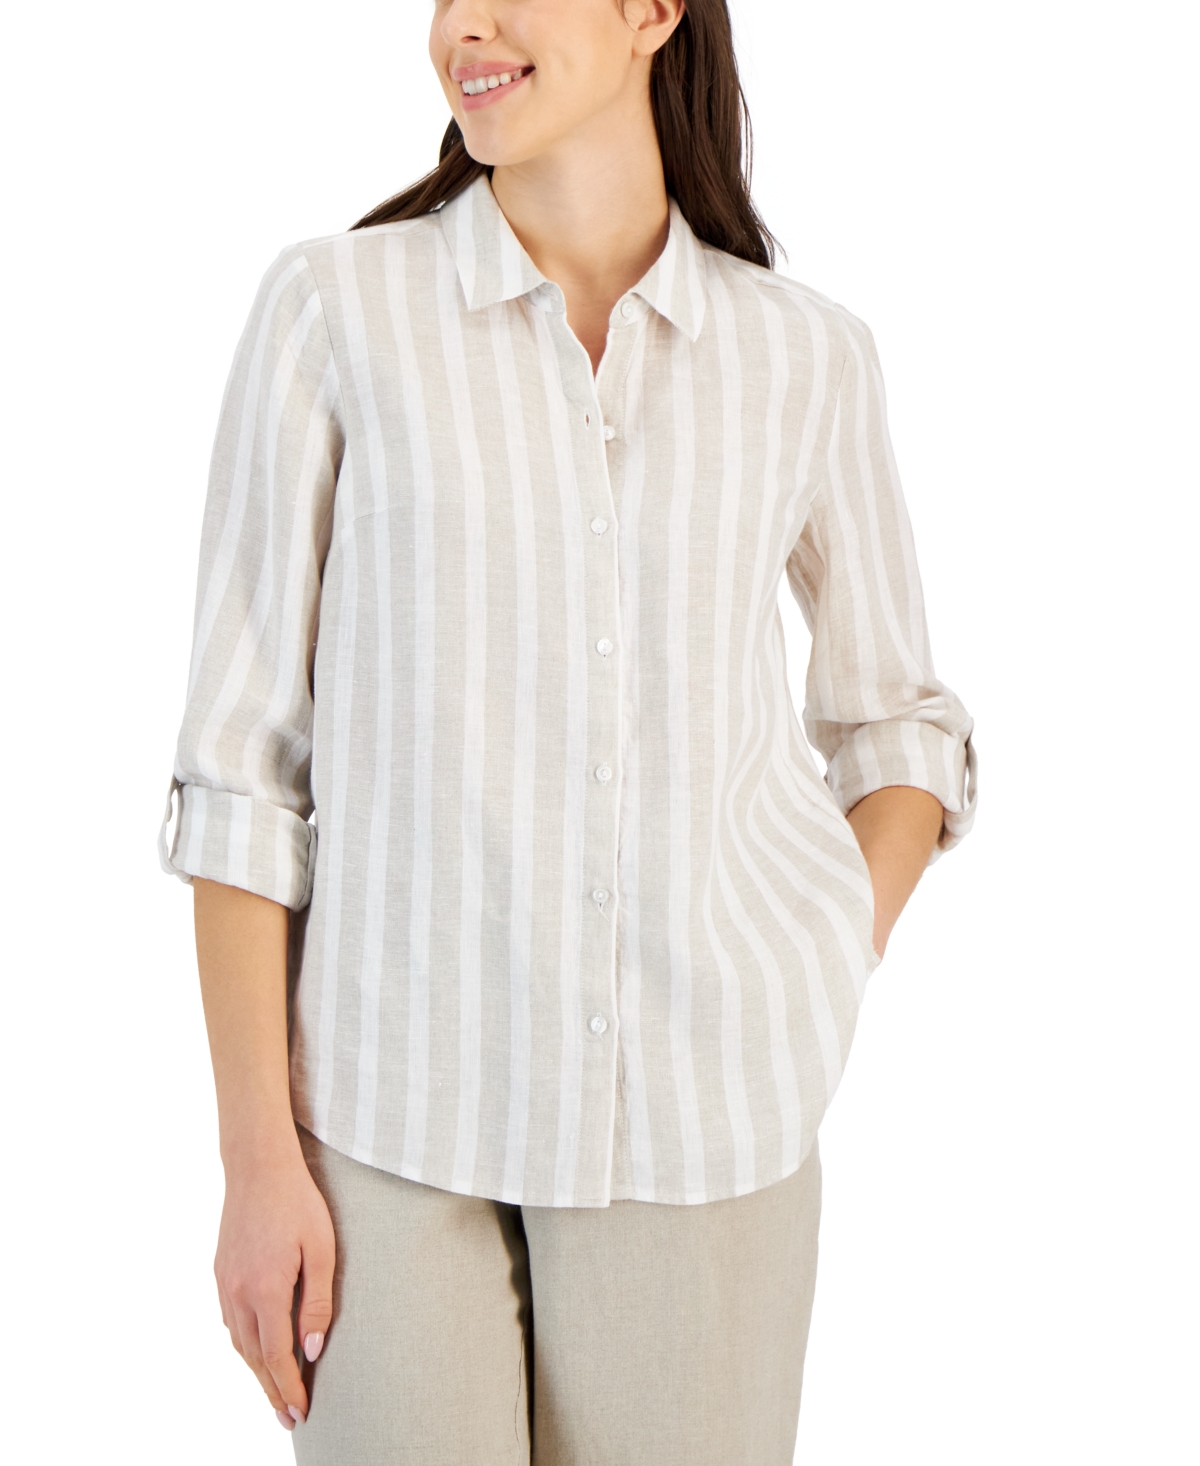 CHARTER CLUB WOMEN'S 100% LINEN STRIPED TAB-SLEEVE SHIRT, CREATED FOR MACY'S